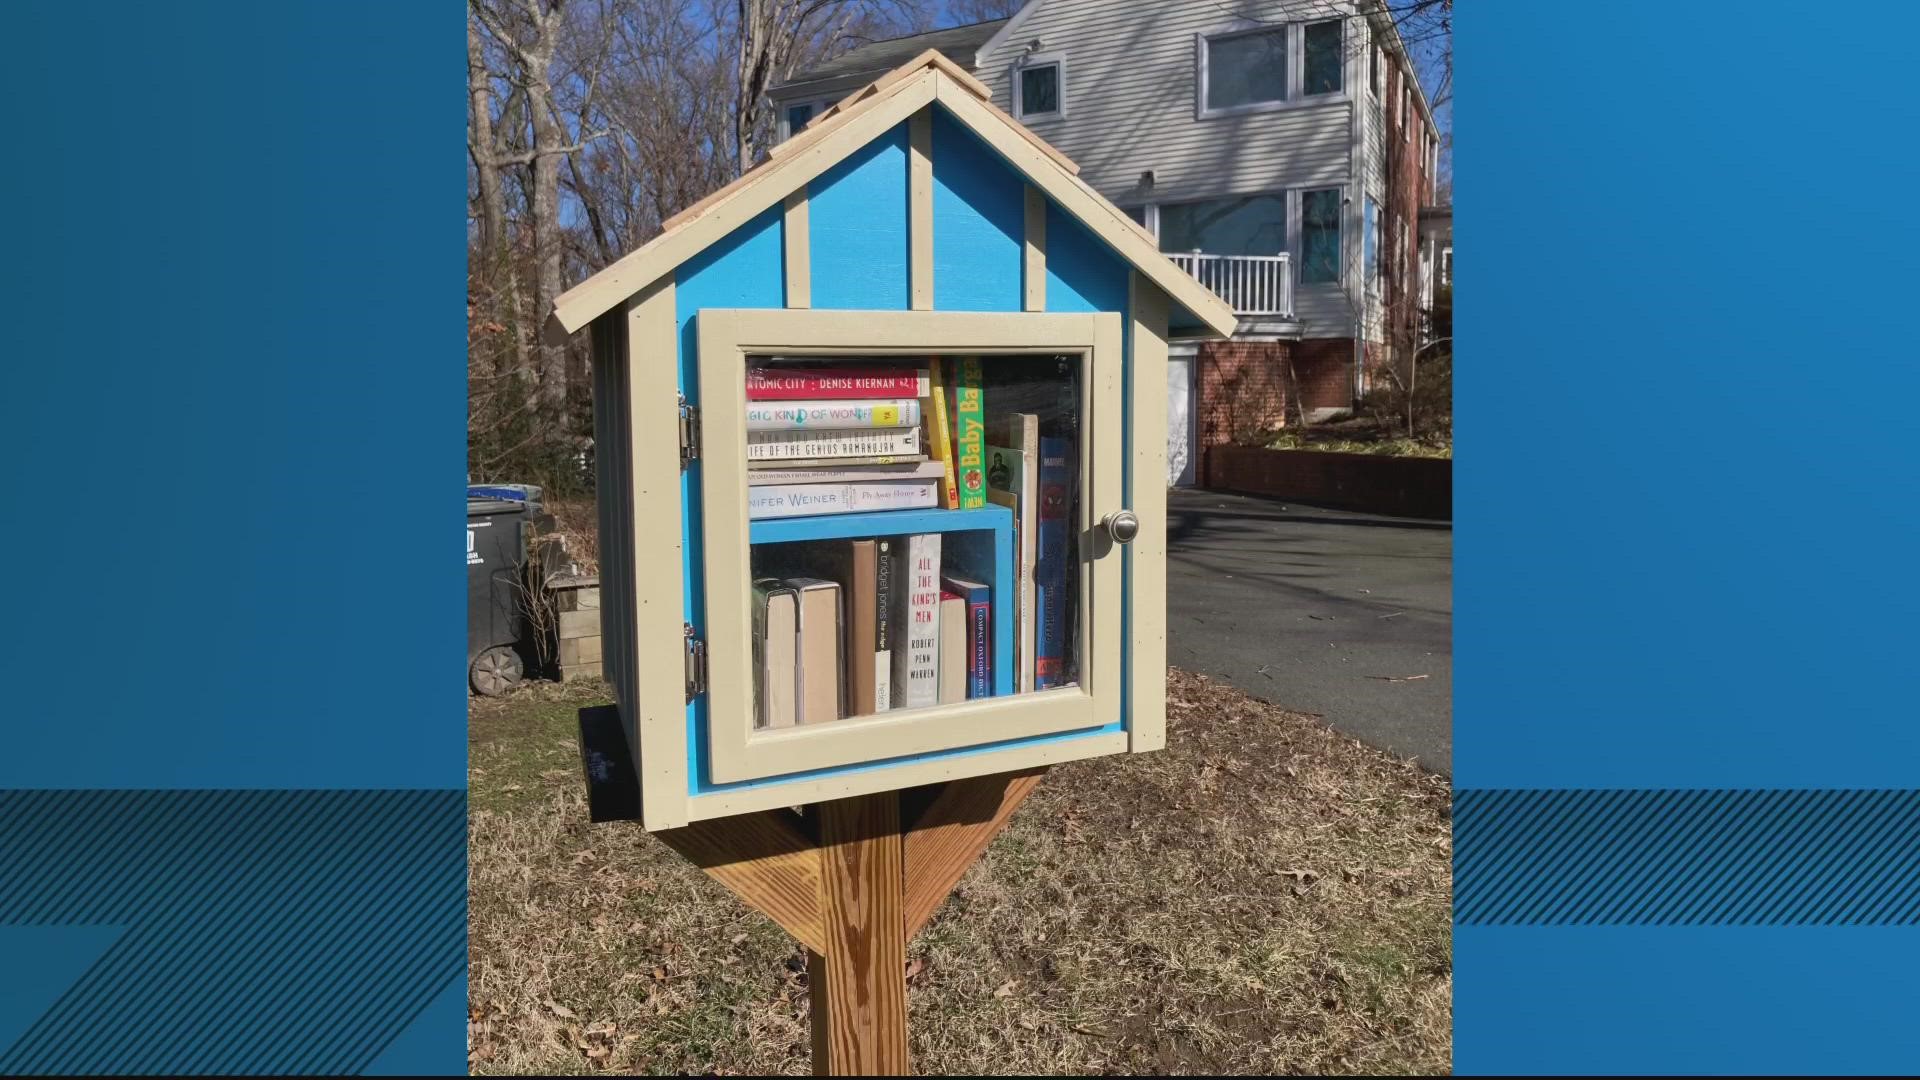 After an explosion in Arlington, Virginia destroyed a Free Little Library last year, someone rebuilt it last week, the owner told WUSA9 on Monday.